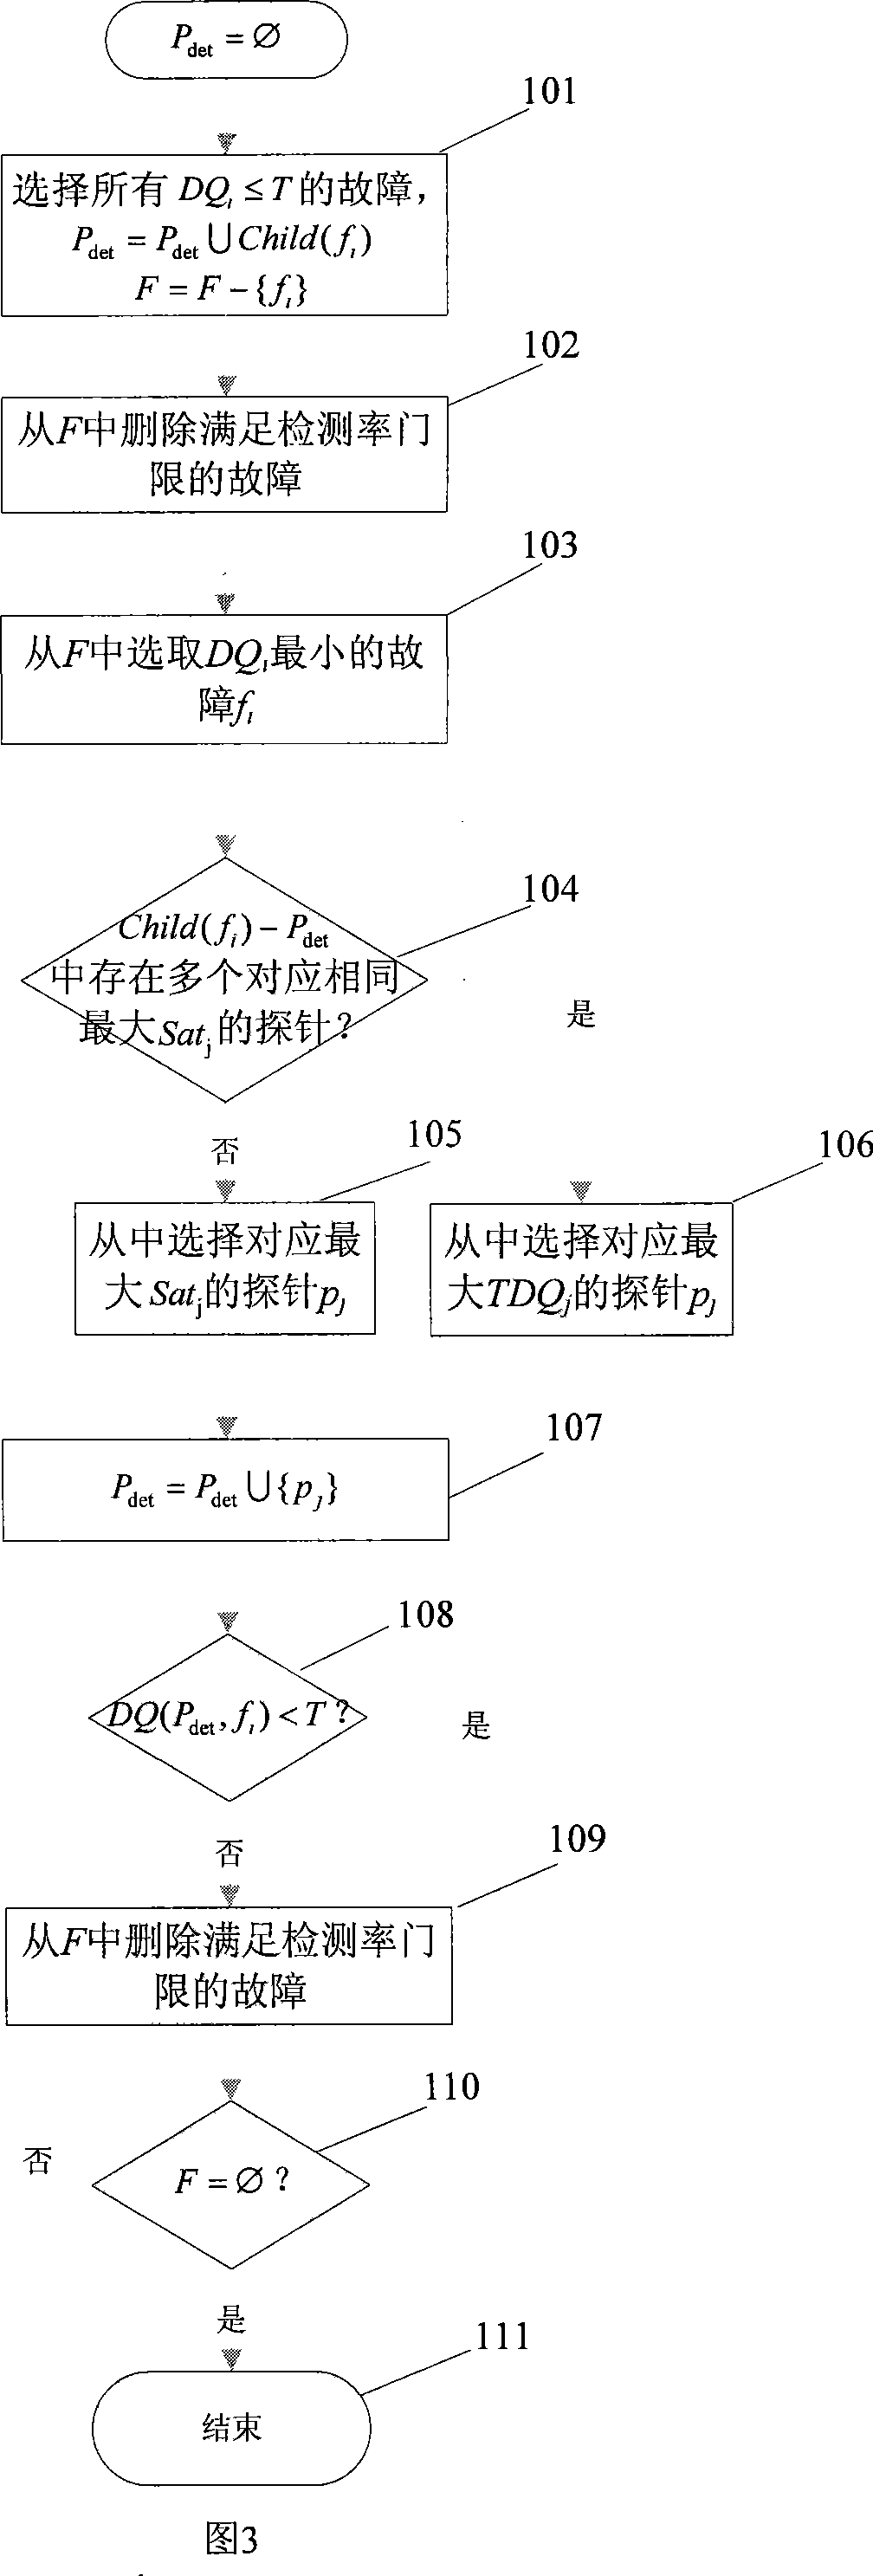 Service failure diagnosis system based on active probe and its method